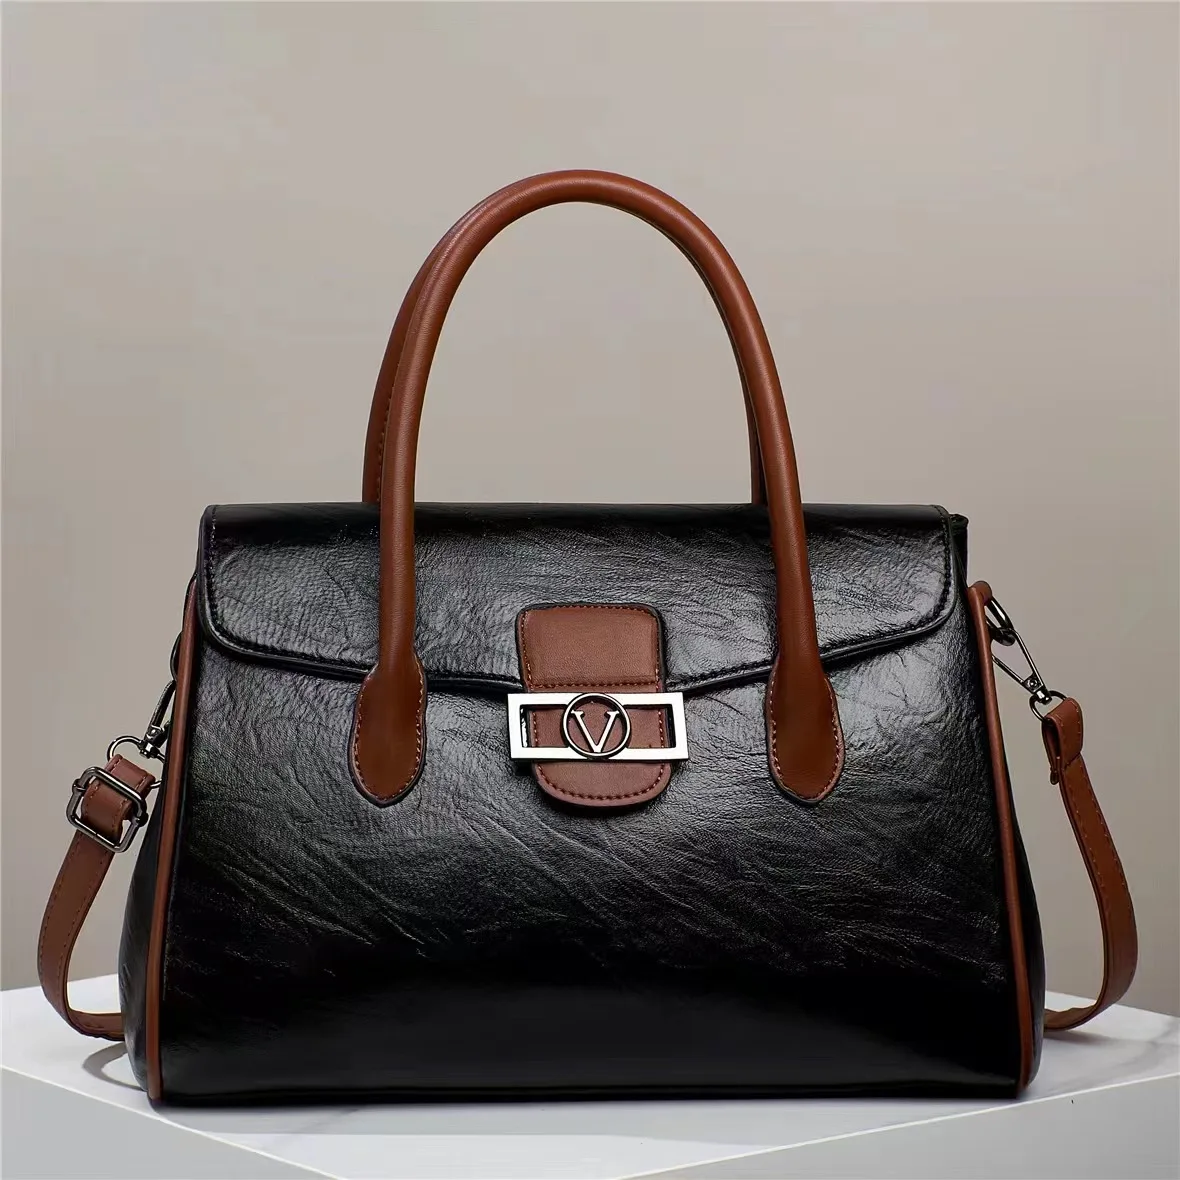 

Wholesale Hot Selling Boston Style Woman Handbags Retro Leather Large Handbags for Commuting Ladies High Quality Woman Purse